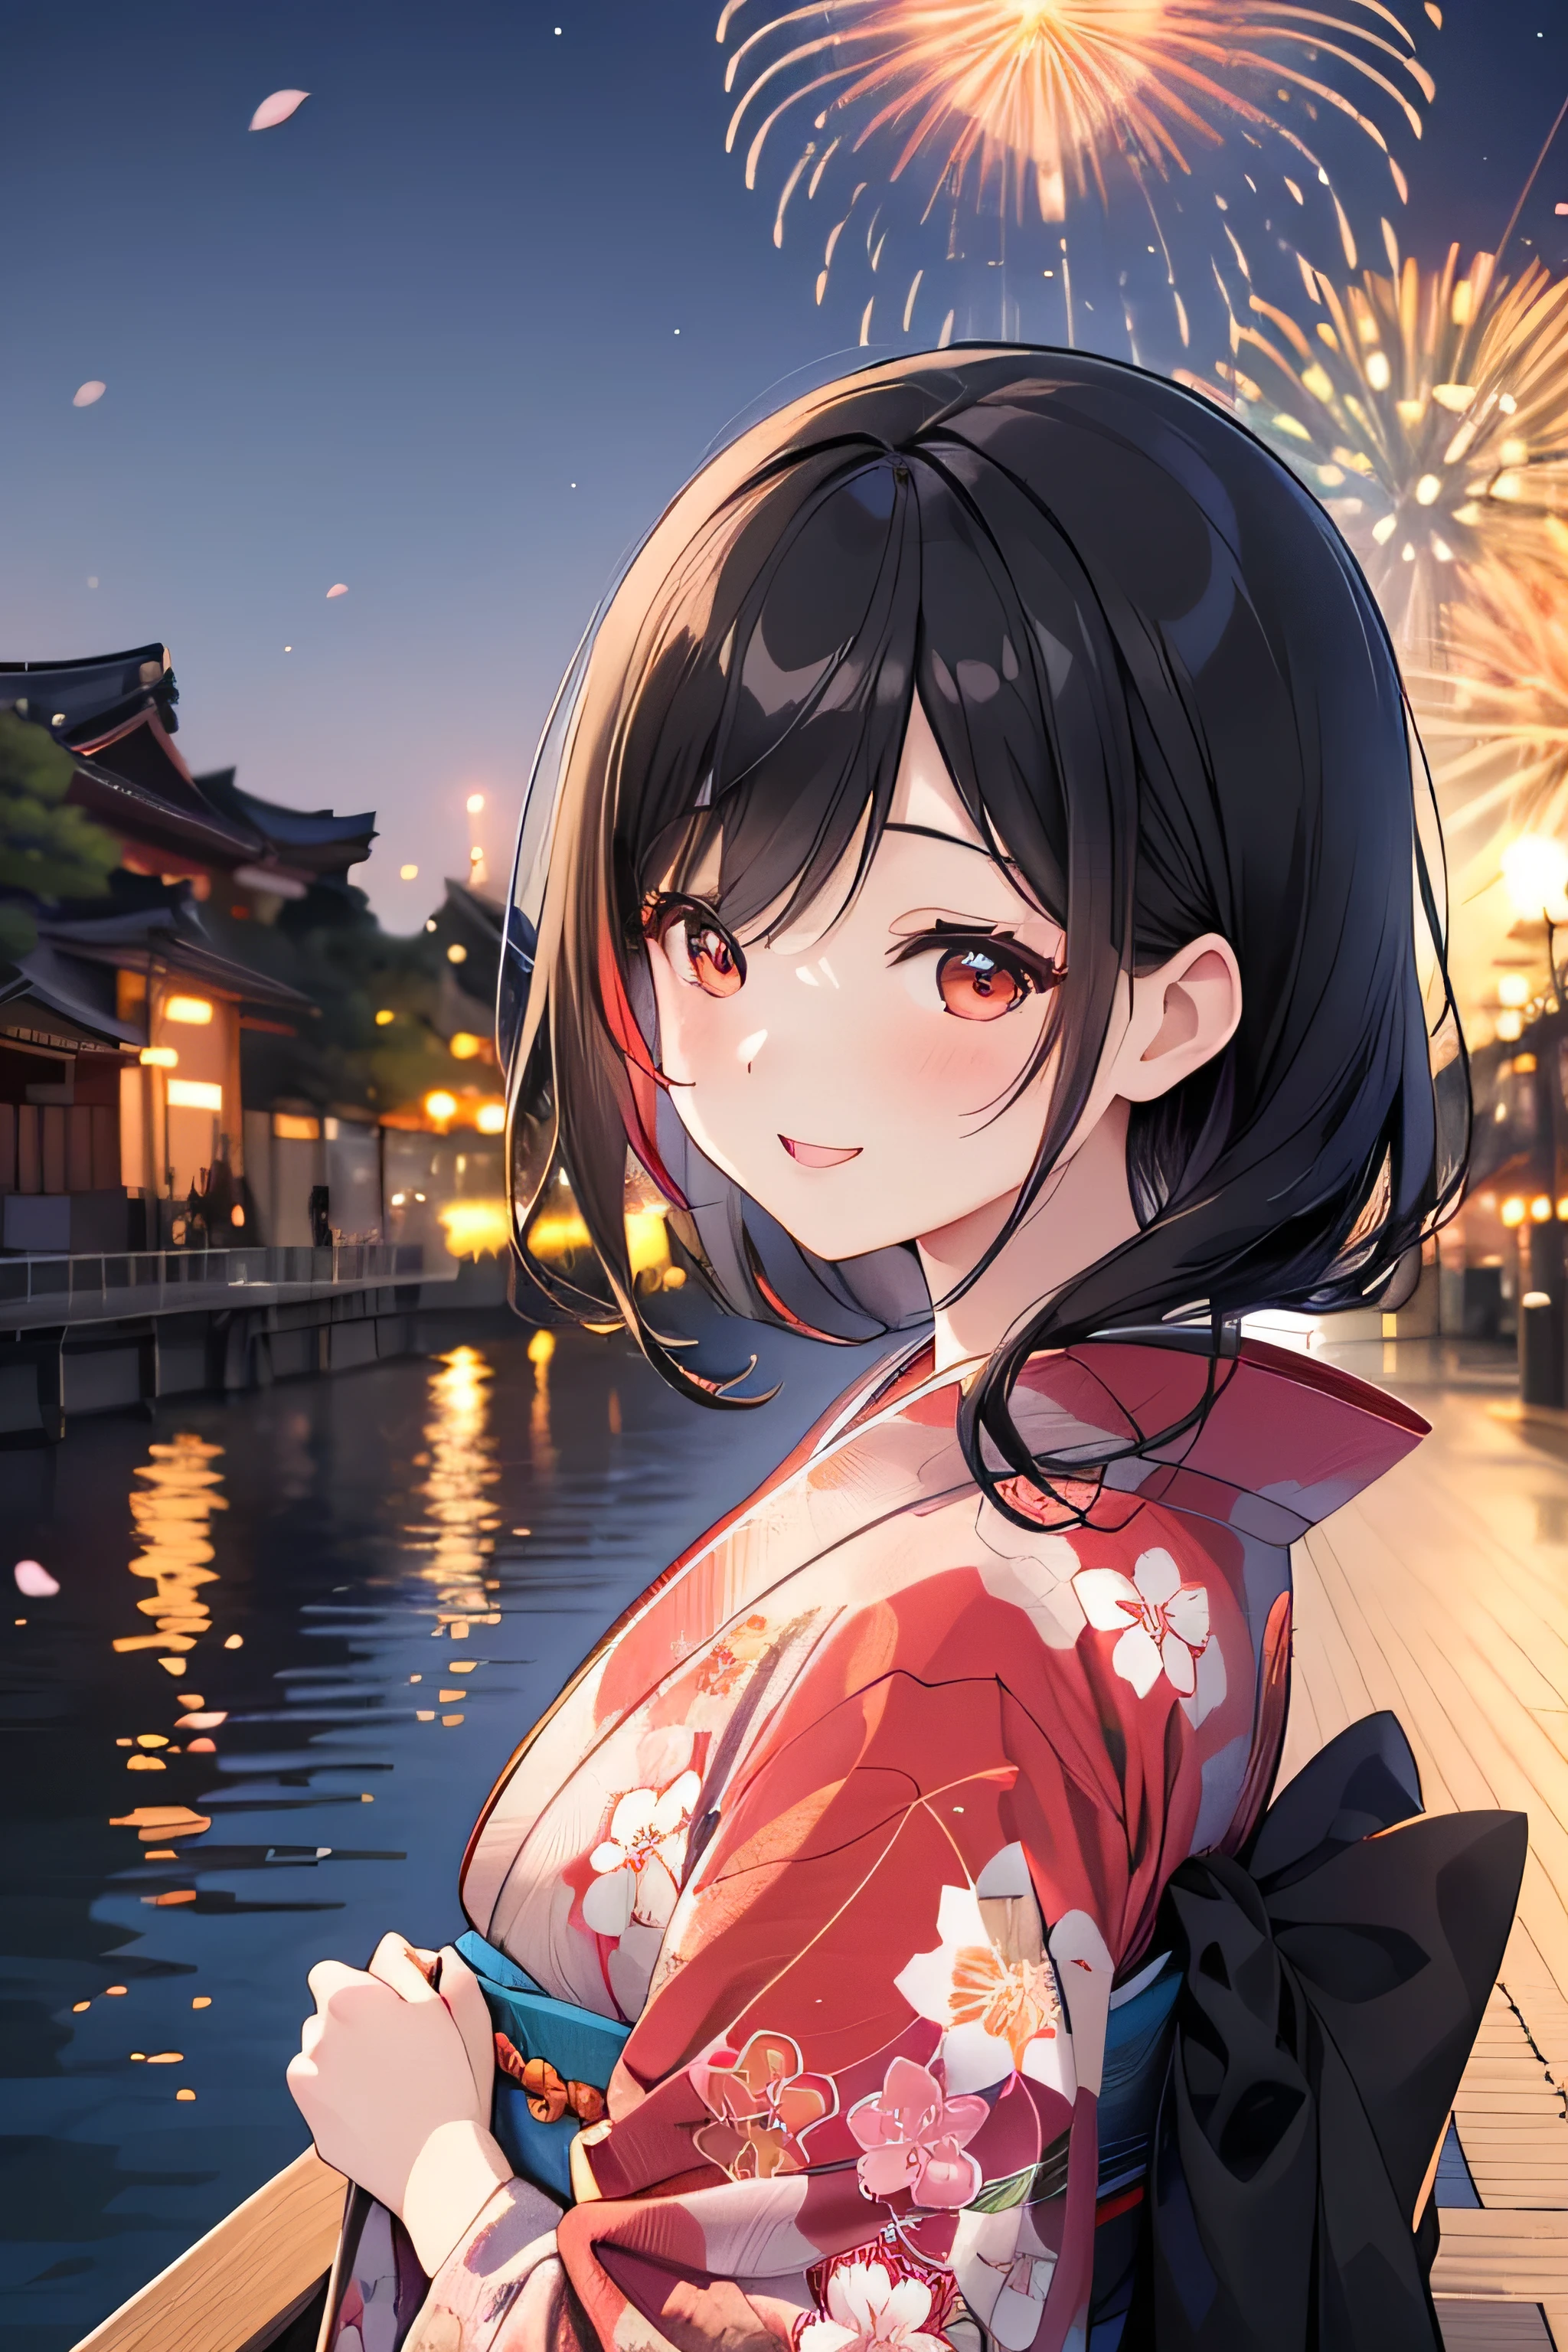 highest quality, Tokyo(Sumida River, Riverbank,Tree-lined street),night, Sunny, Colorful fireworks(Japan fireworks), One beautiful woman(Black Hair, Kimono(Cherry blossom pattern)),Smiling, Watching fireworks